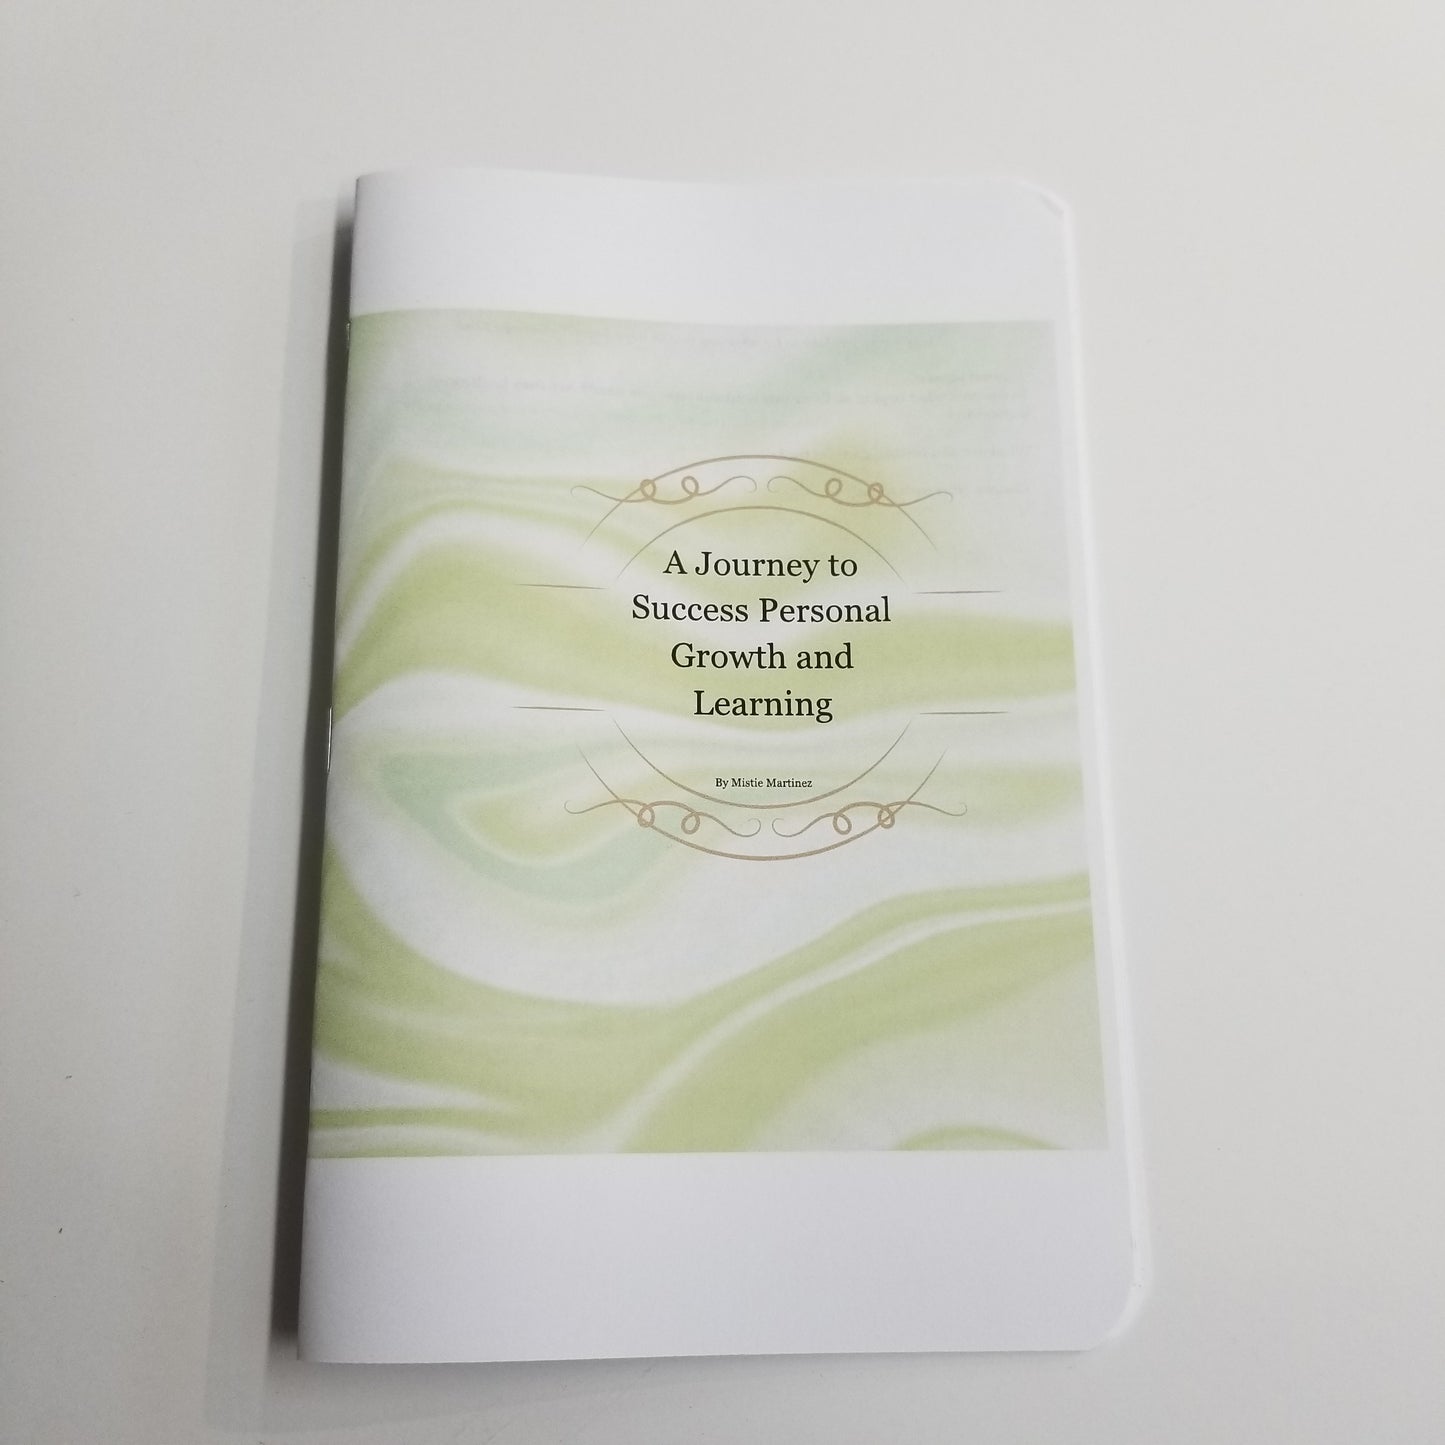 Personal Growth & Learning - A Journey to Success